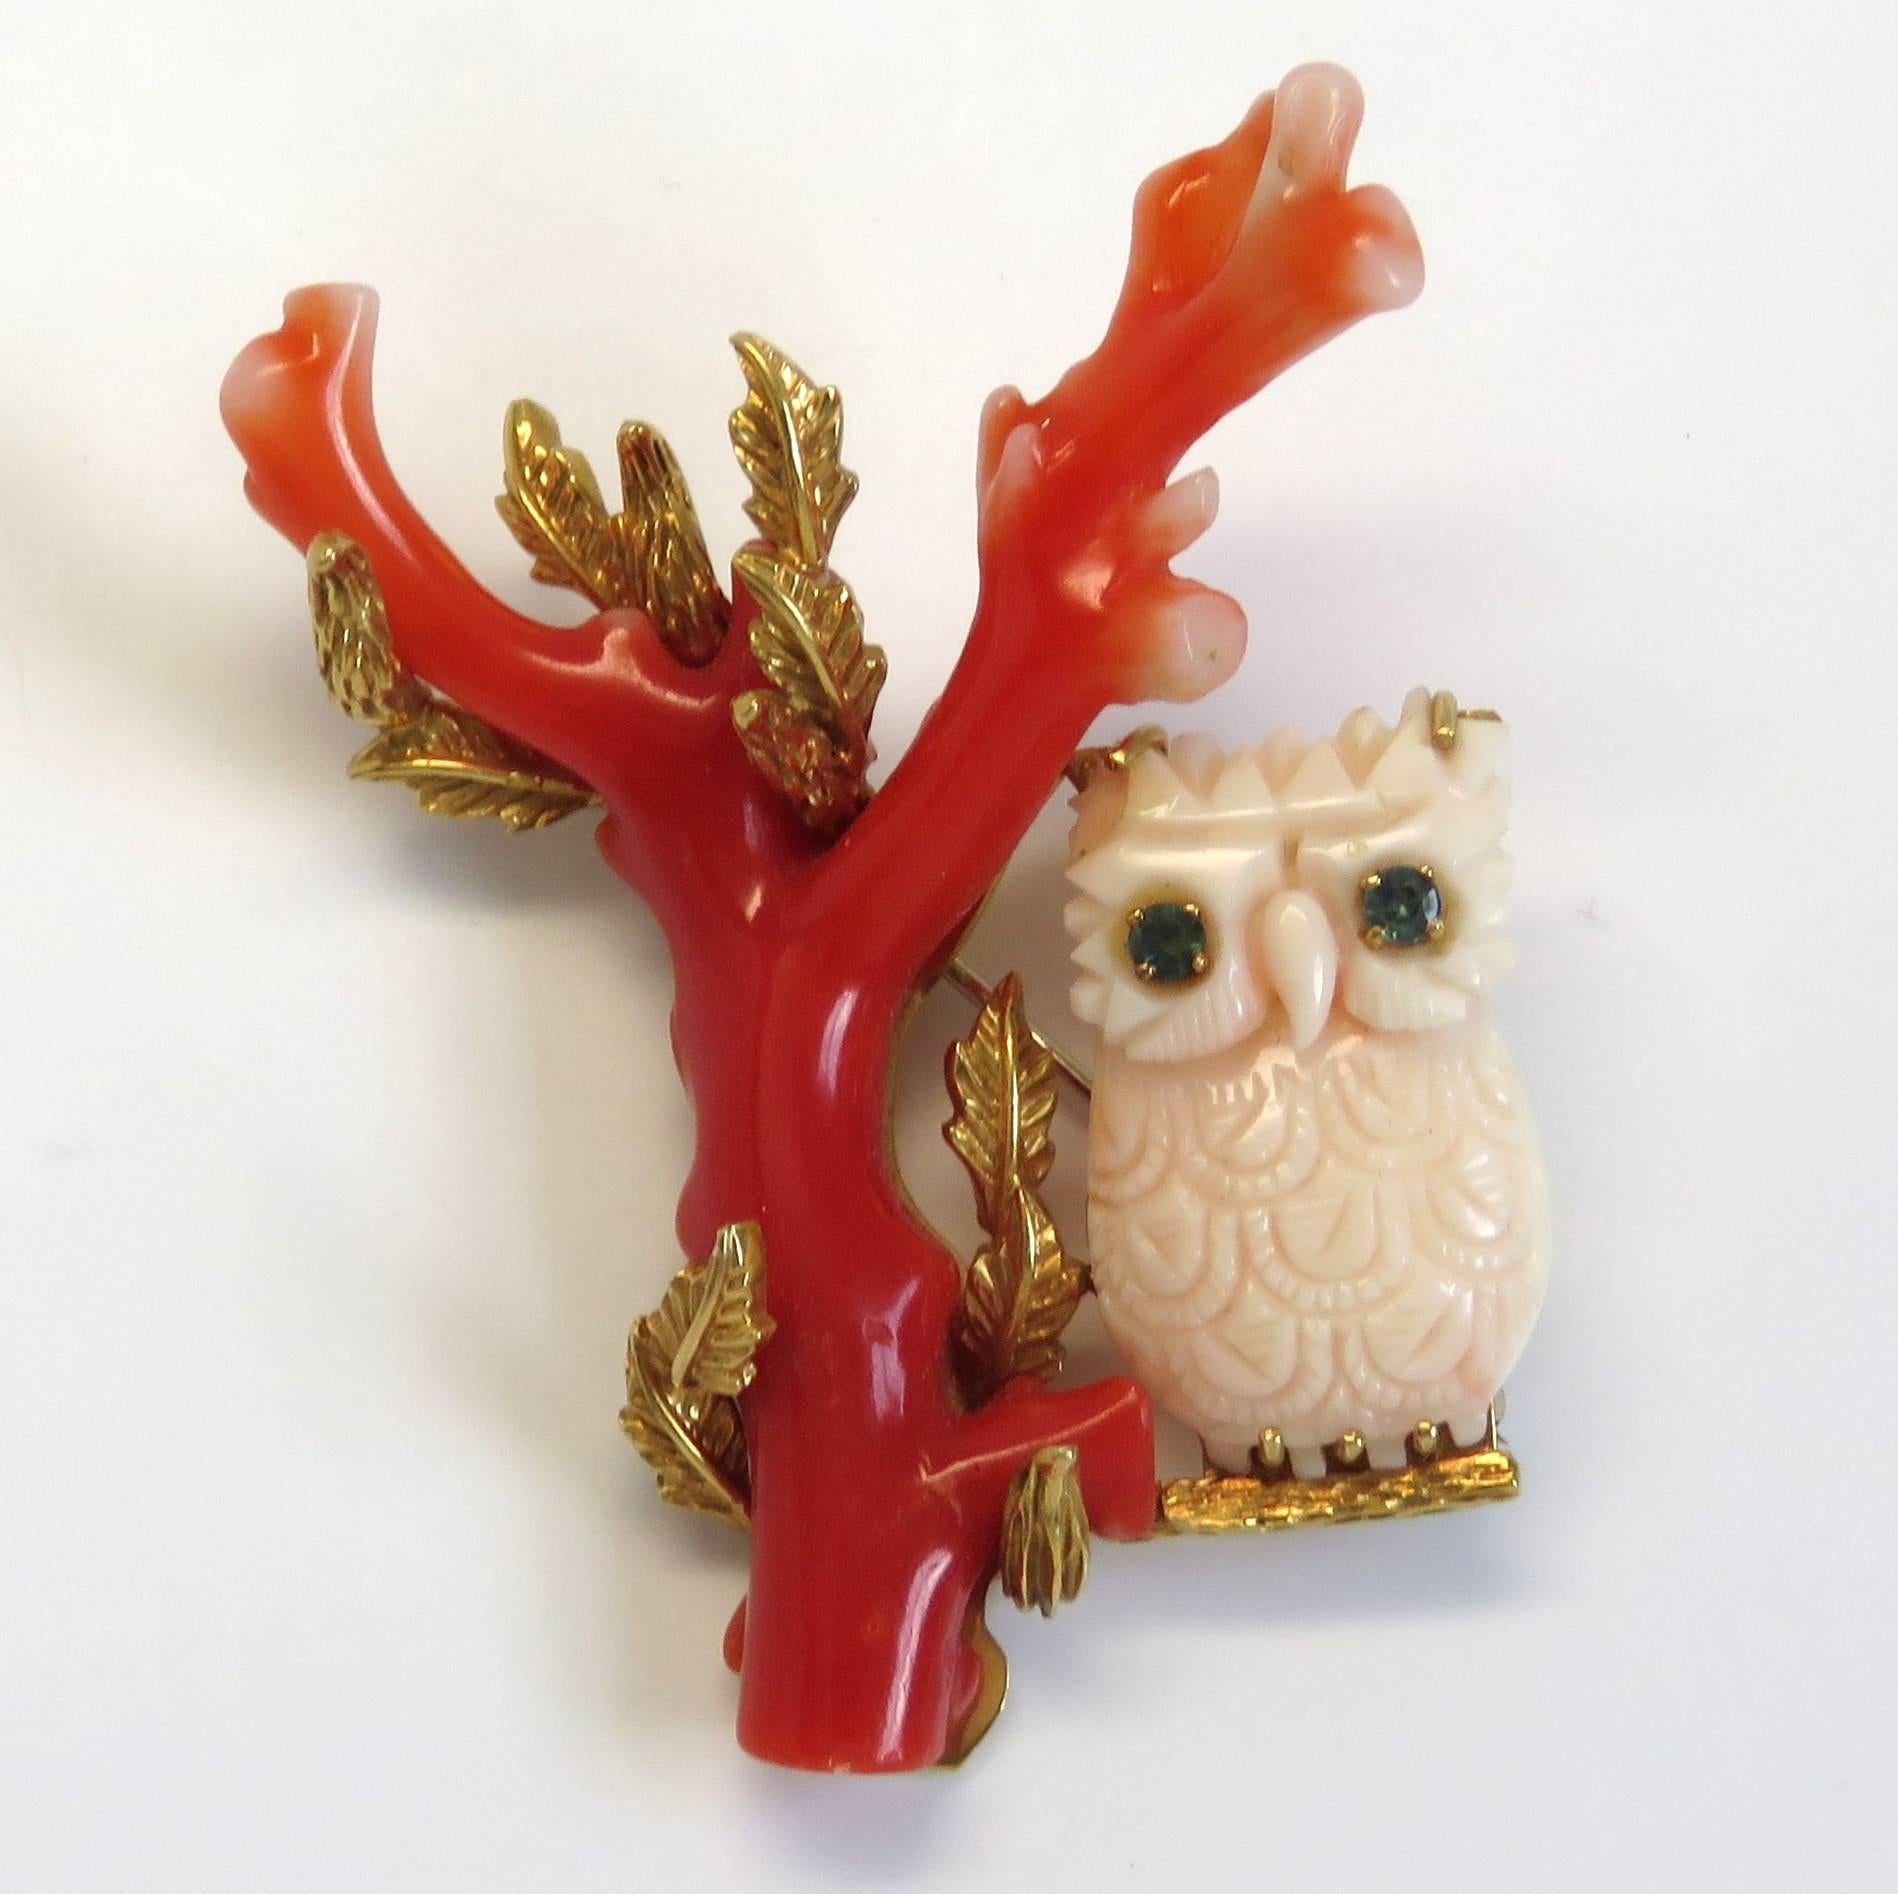 A 14k gold brooch adorned with red and angel skin coral, which depicts an owl with sapphire eyes sitting on a branch.  The piece measures 60mm x 44mm and weighs 22 grams.